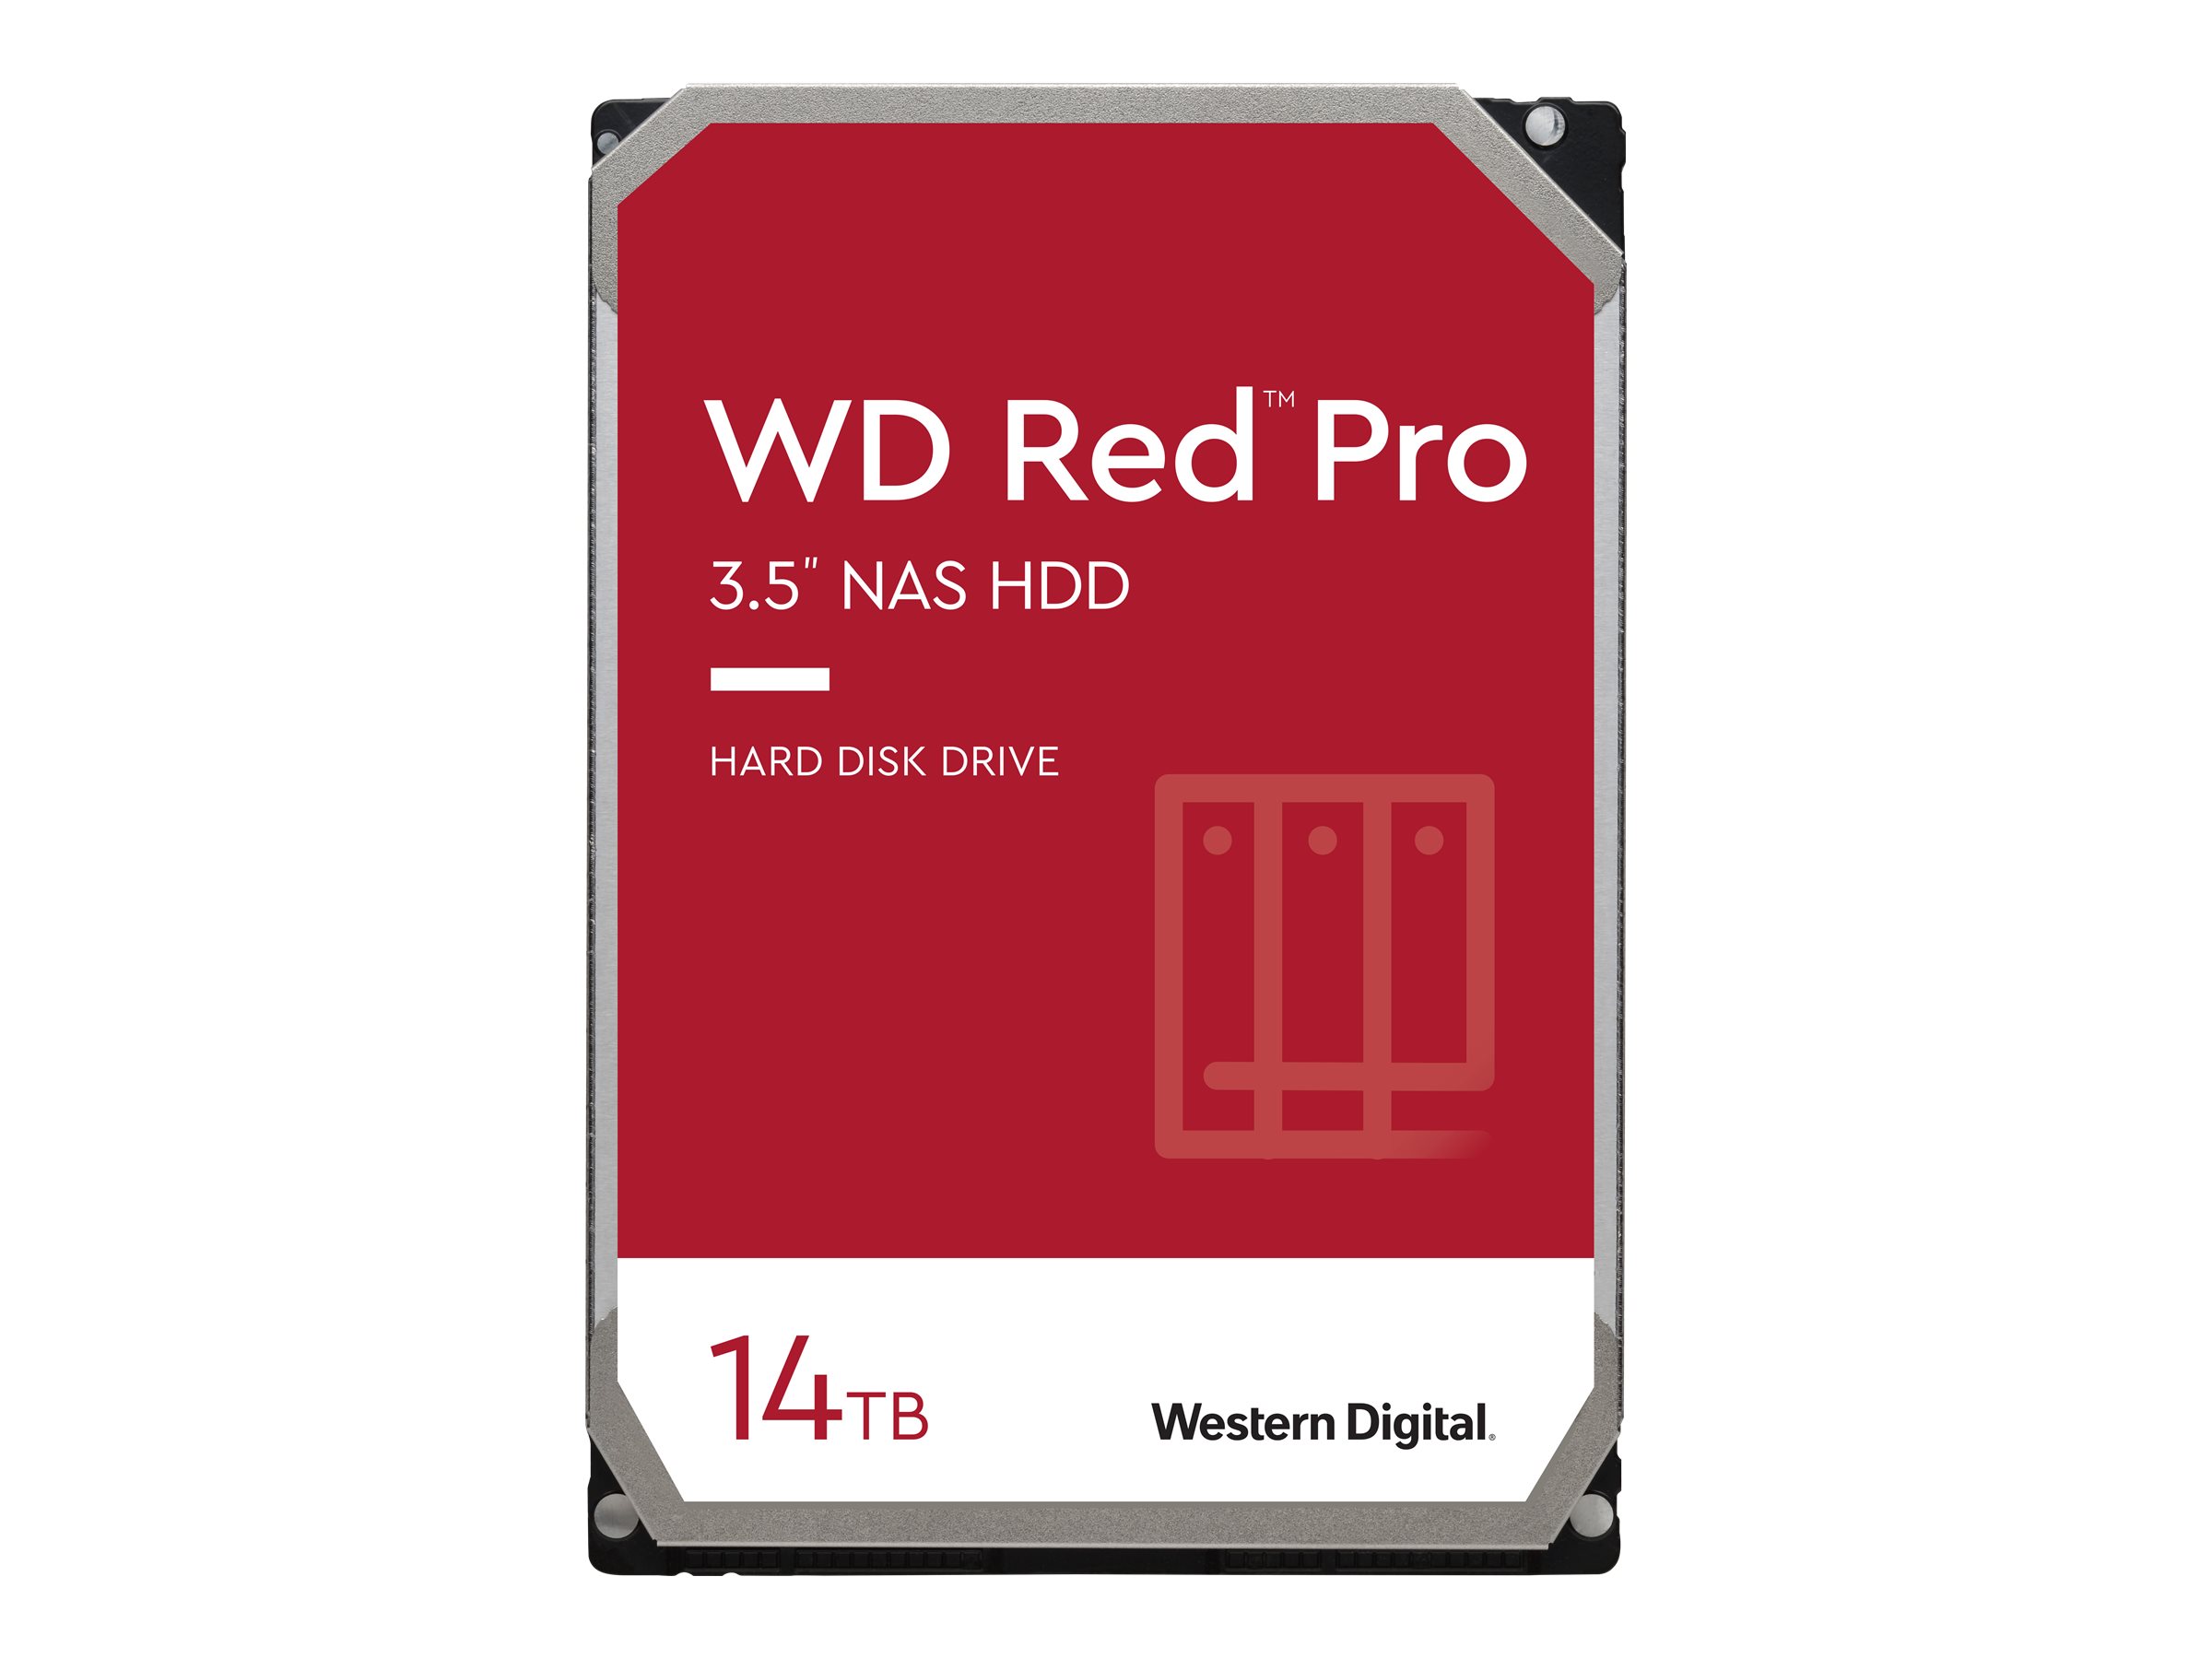 WD Red Pro WD142KFGX - Disque dur - 14 To - interne - 3.5" - SATA 6Gb/s - 7200 tours/min - mémoire tampon : 512 Mo - WD142KFGX - Disques durs internes